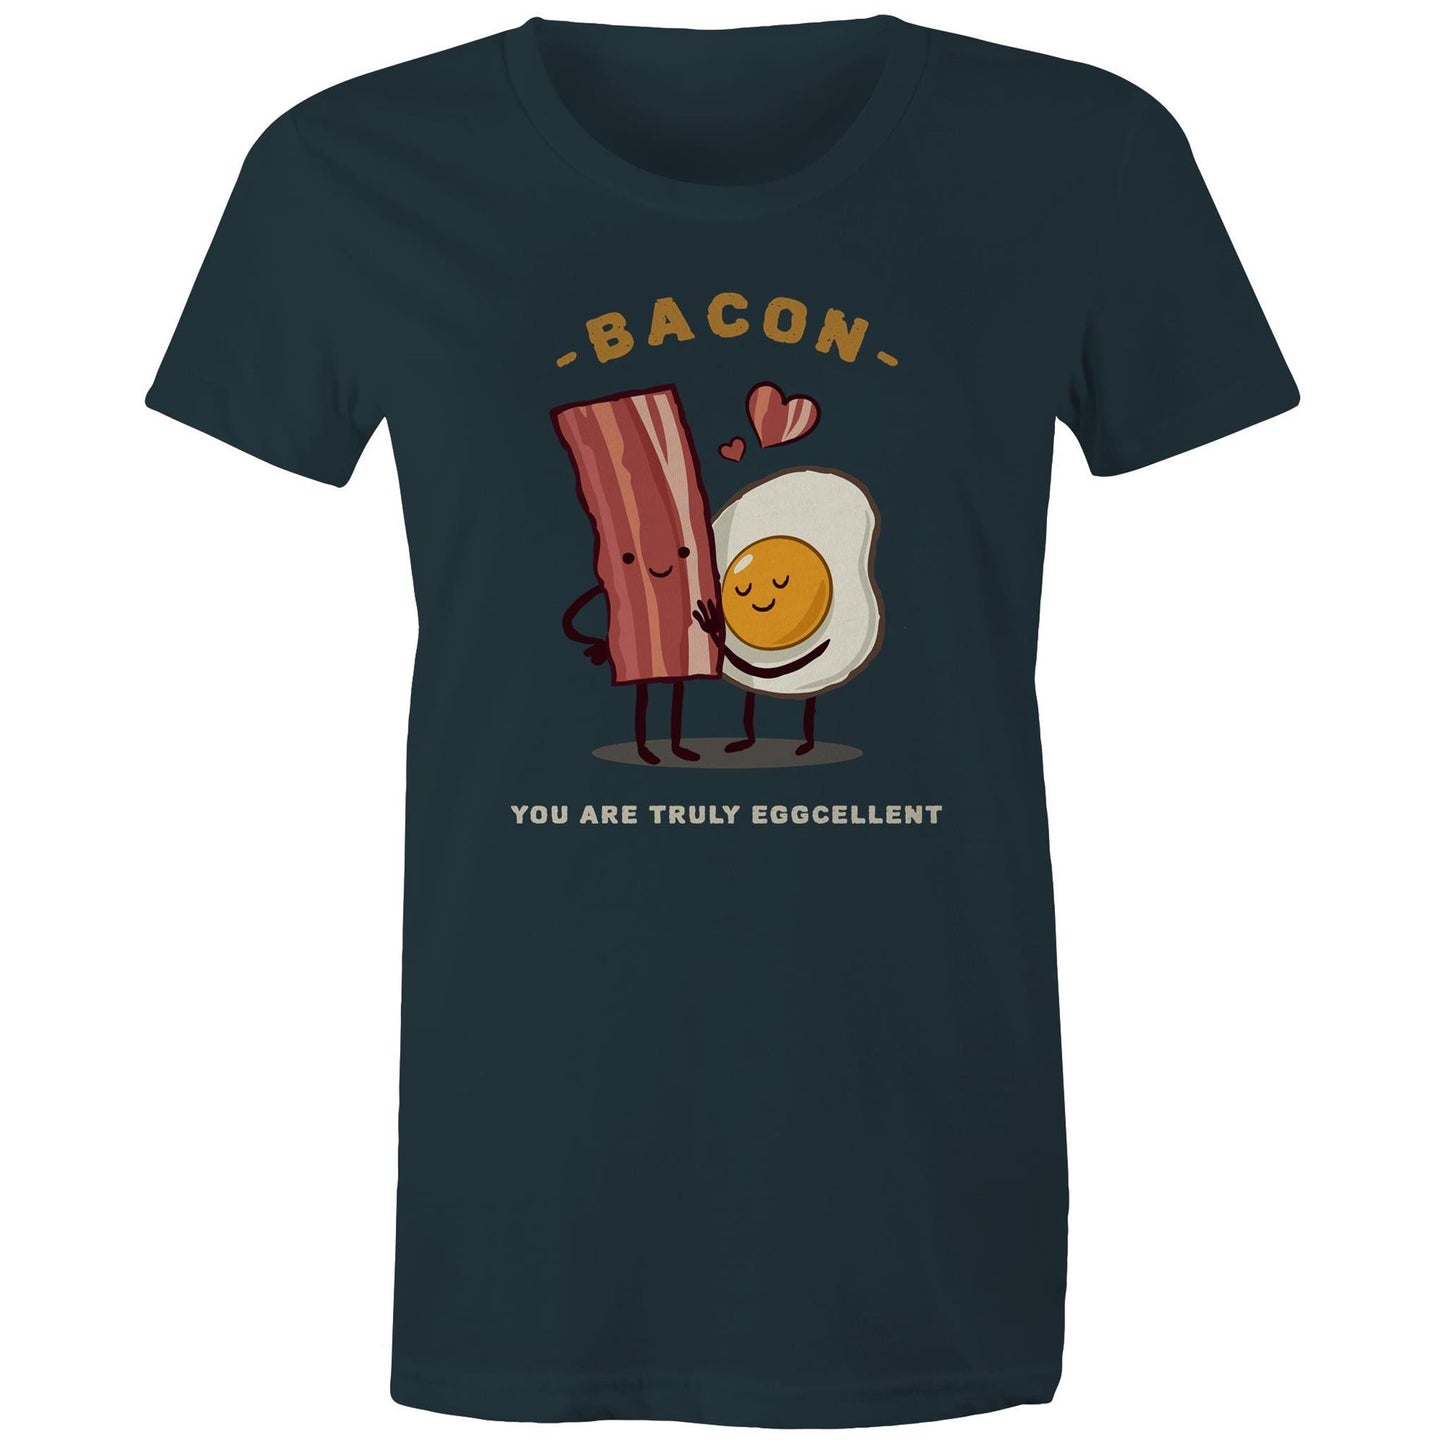 Bacon, You Are Truly Eggcellent - Womens T-shirt Indigo Womens T-shirt Food